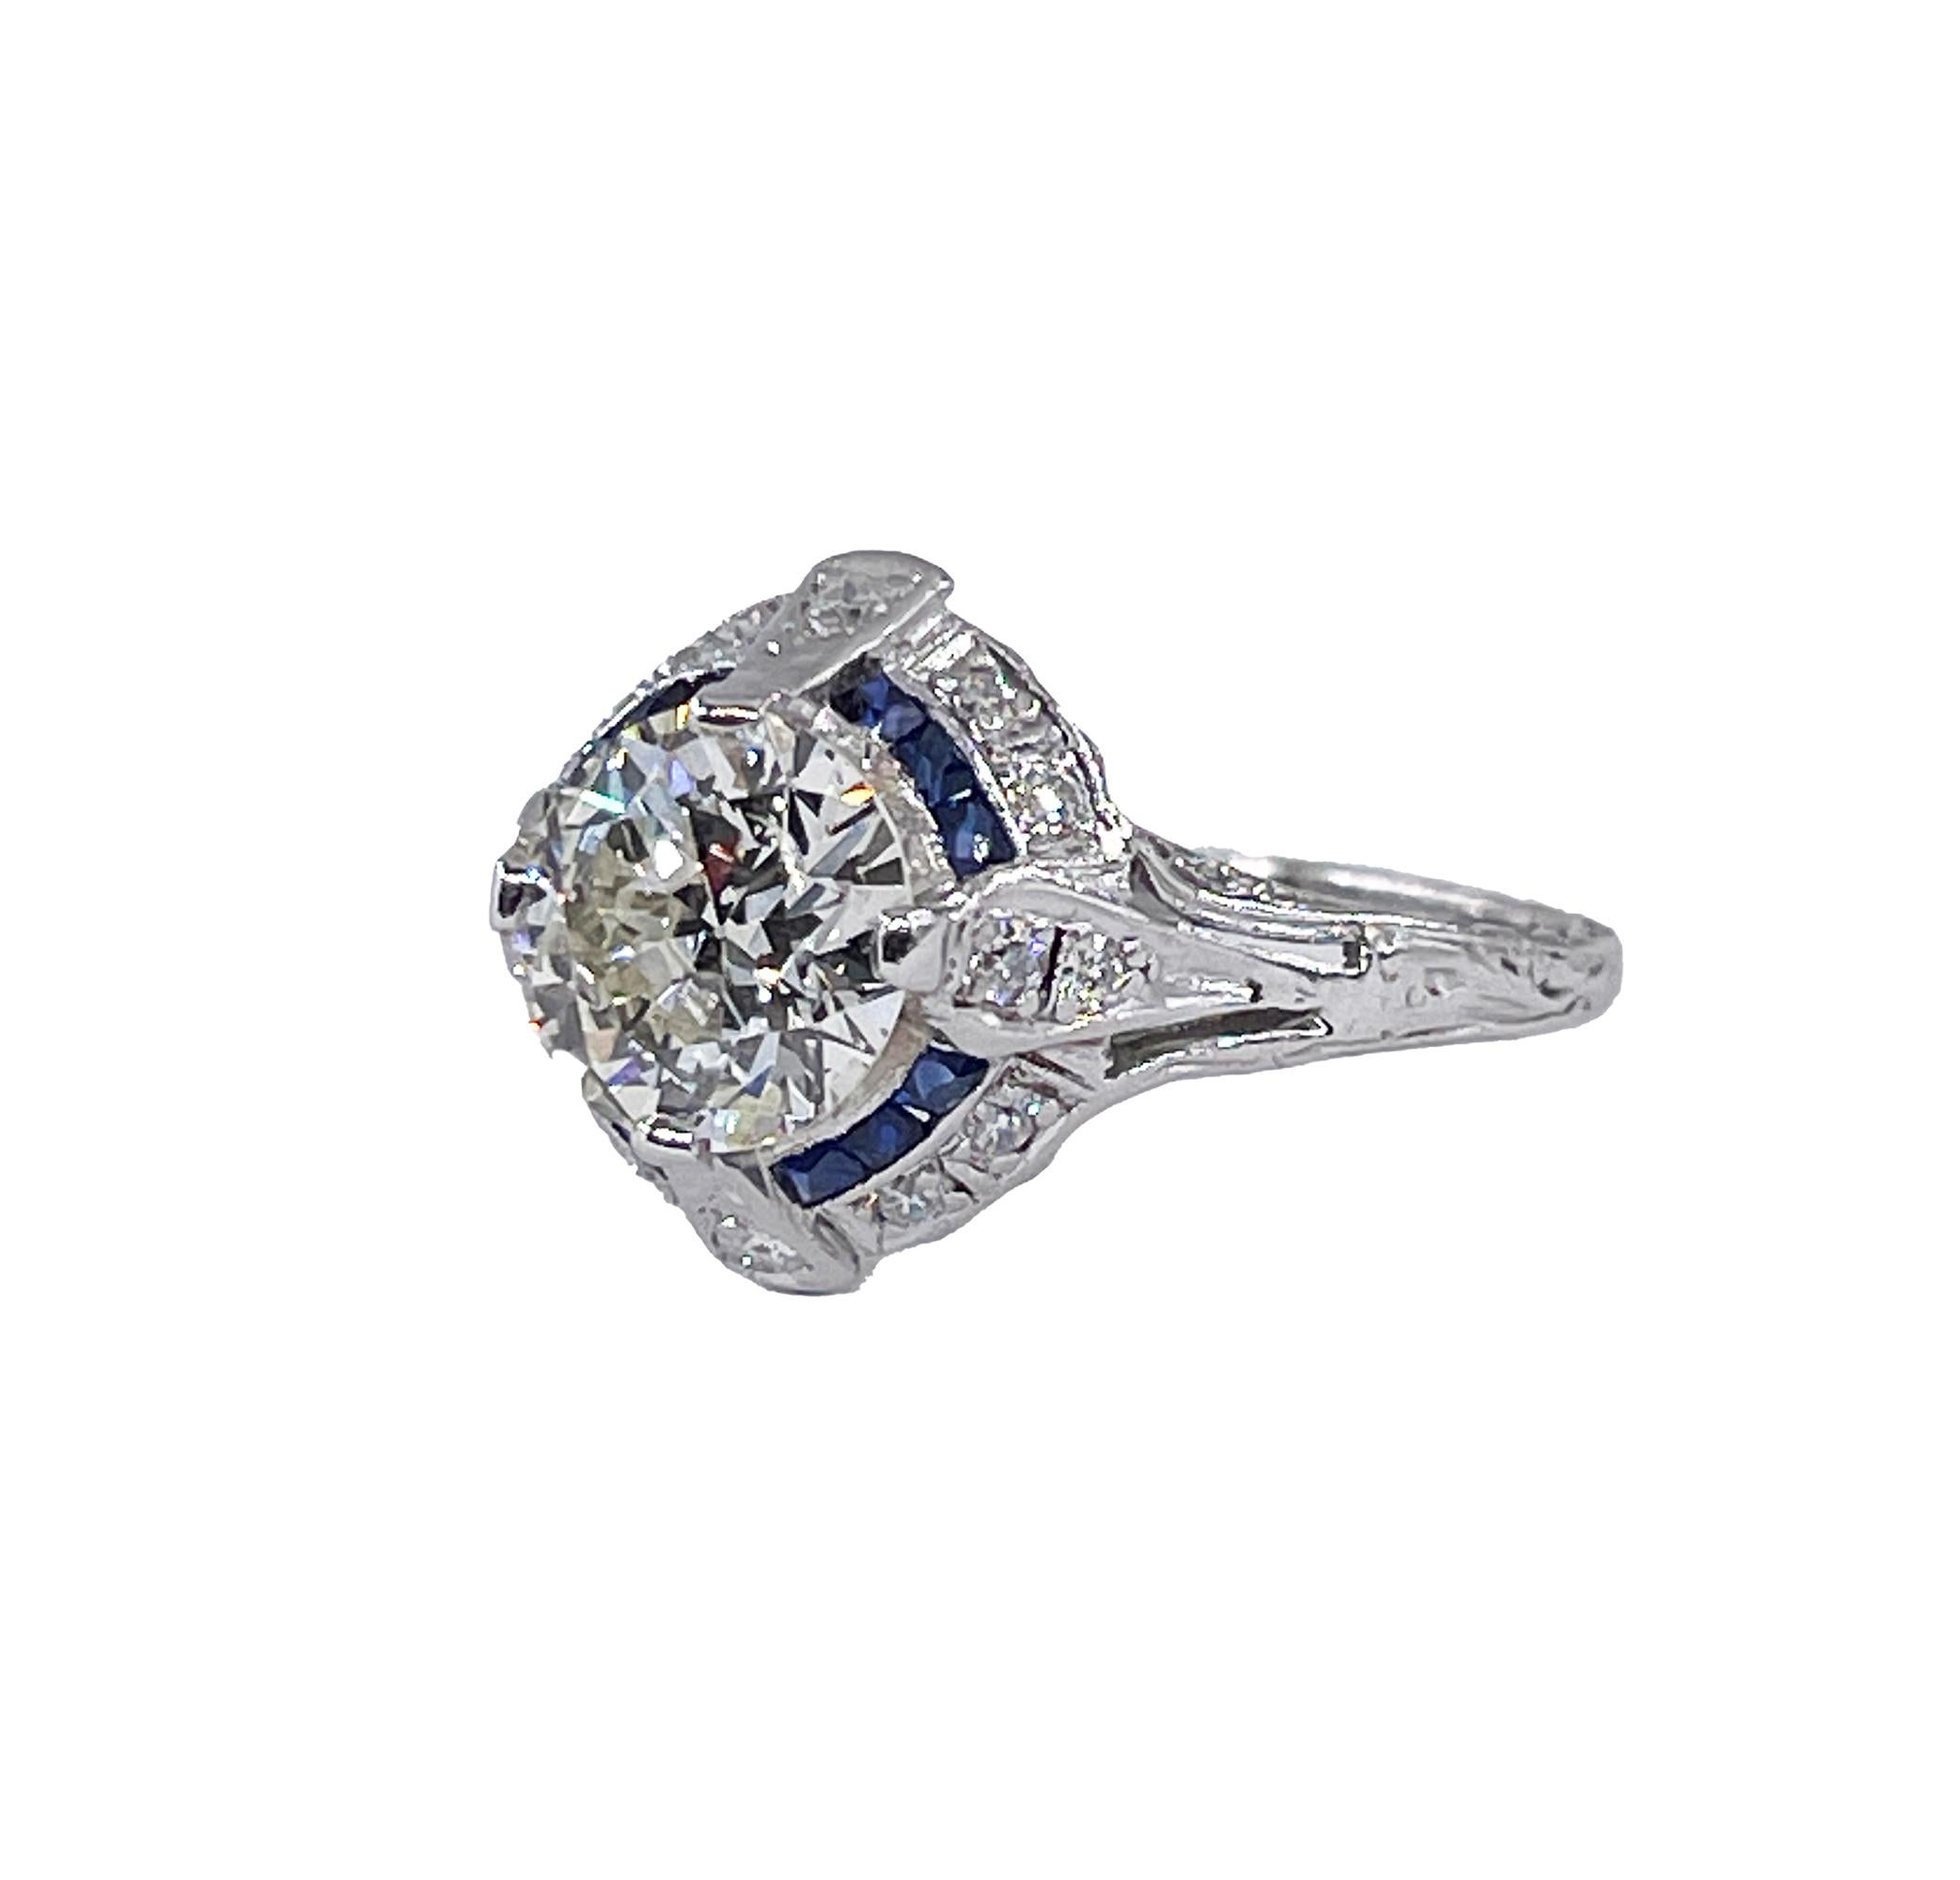 Art Deco GIA 3.0ct Old EUROPEAN Diamond Sapphire Platinum Engagement Vintage Antique Ring.
Few come finer or as fabulous as this original handcrafted platinum diamond and sapphire ring with 3ct in gems. Classic 1920s Art Deco.
If you are in the